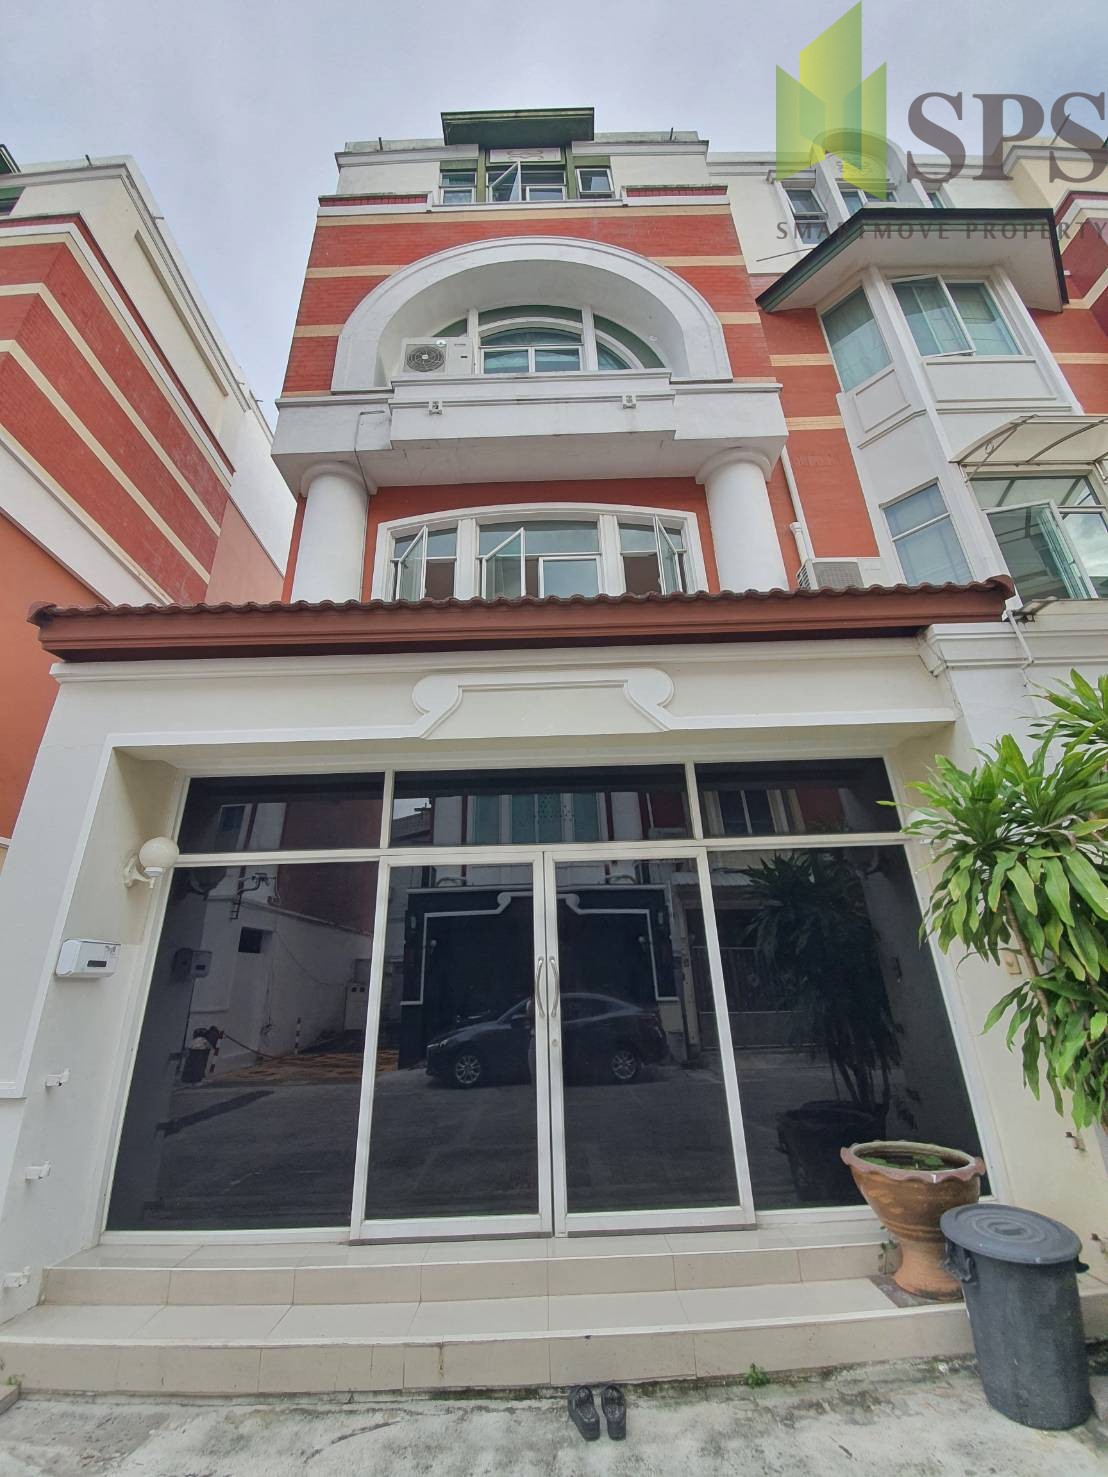 Townhome for SALE in Sukhumvit 103 (SPSP389)